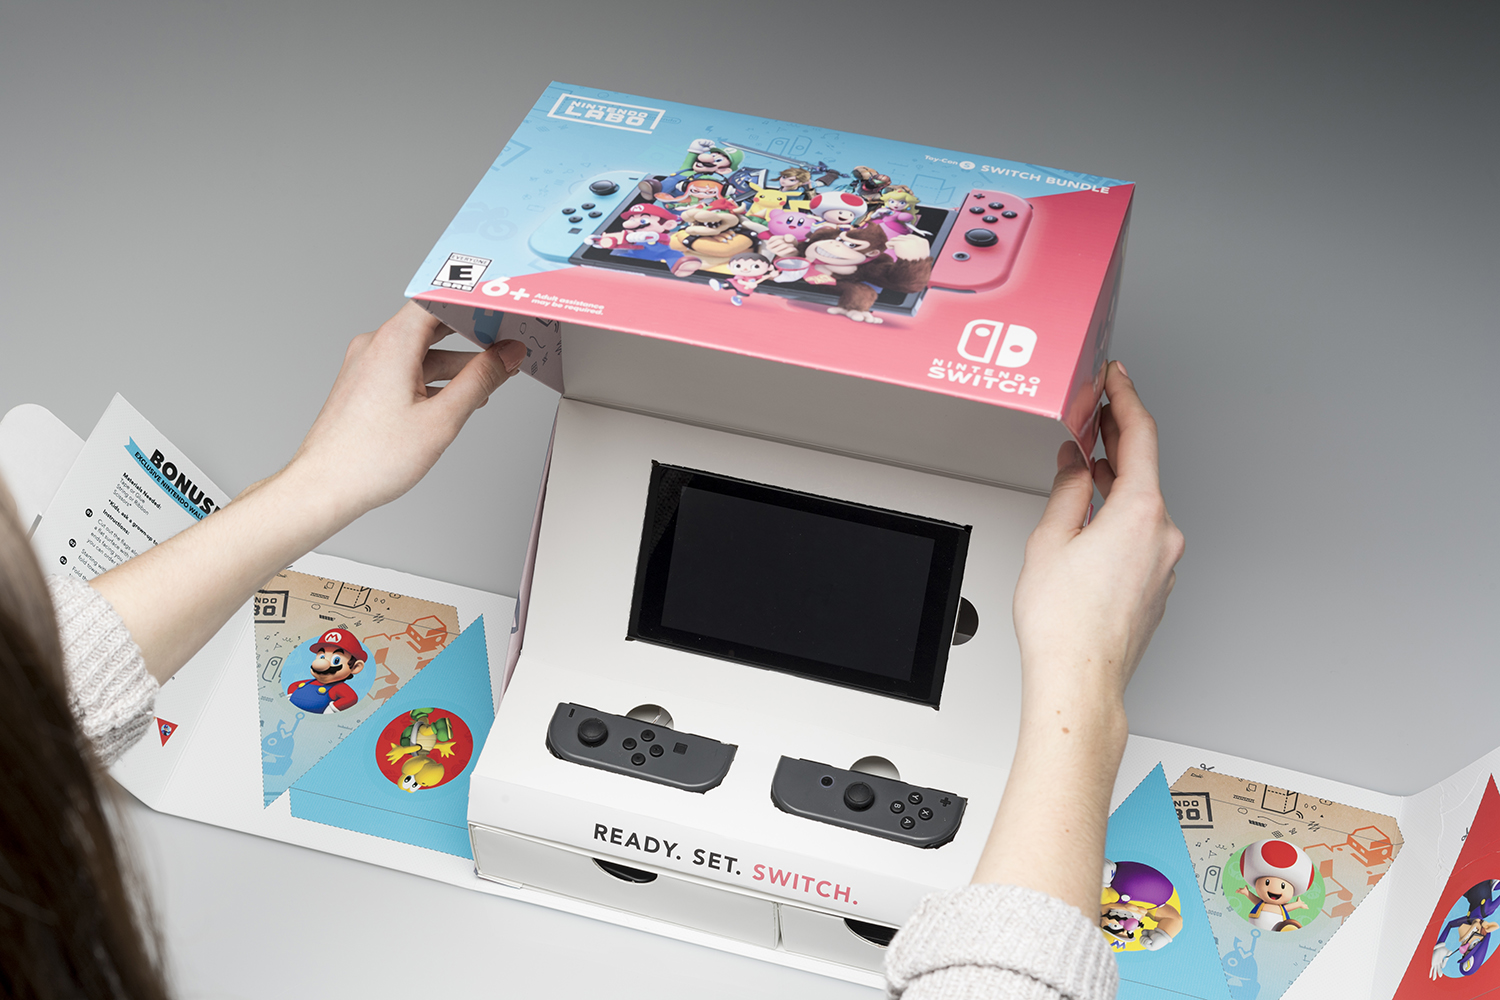 The Nintendo Labs box getting opened